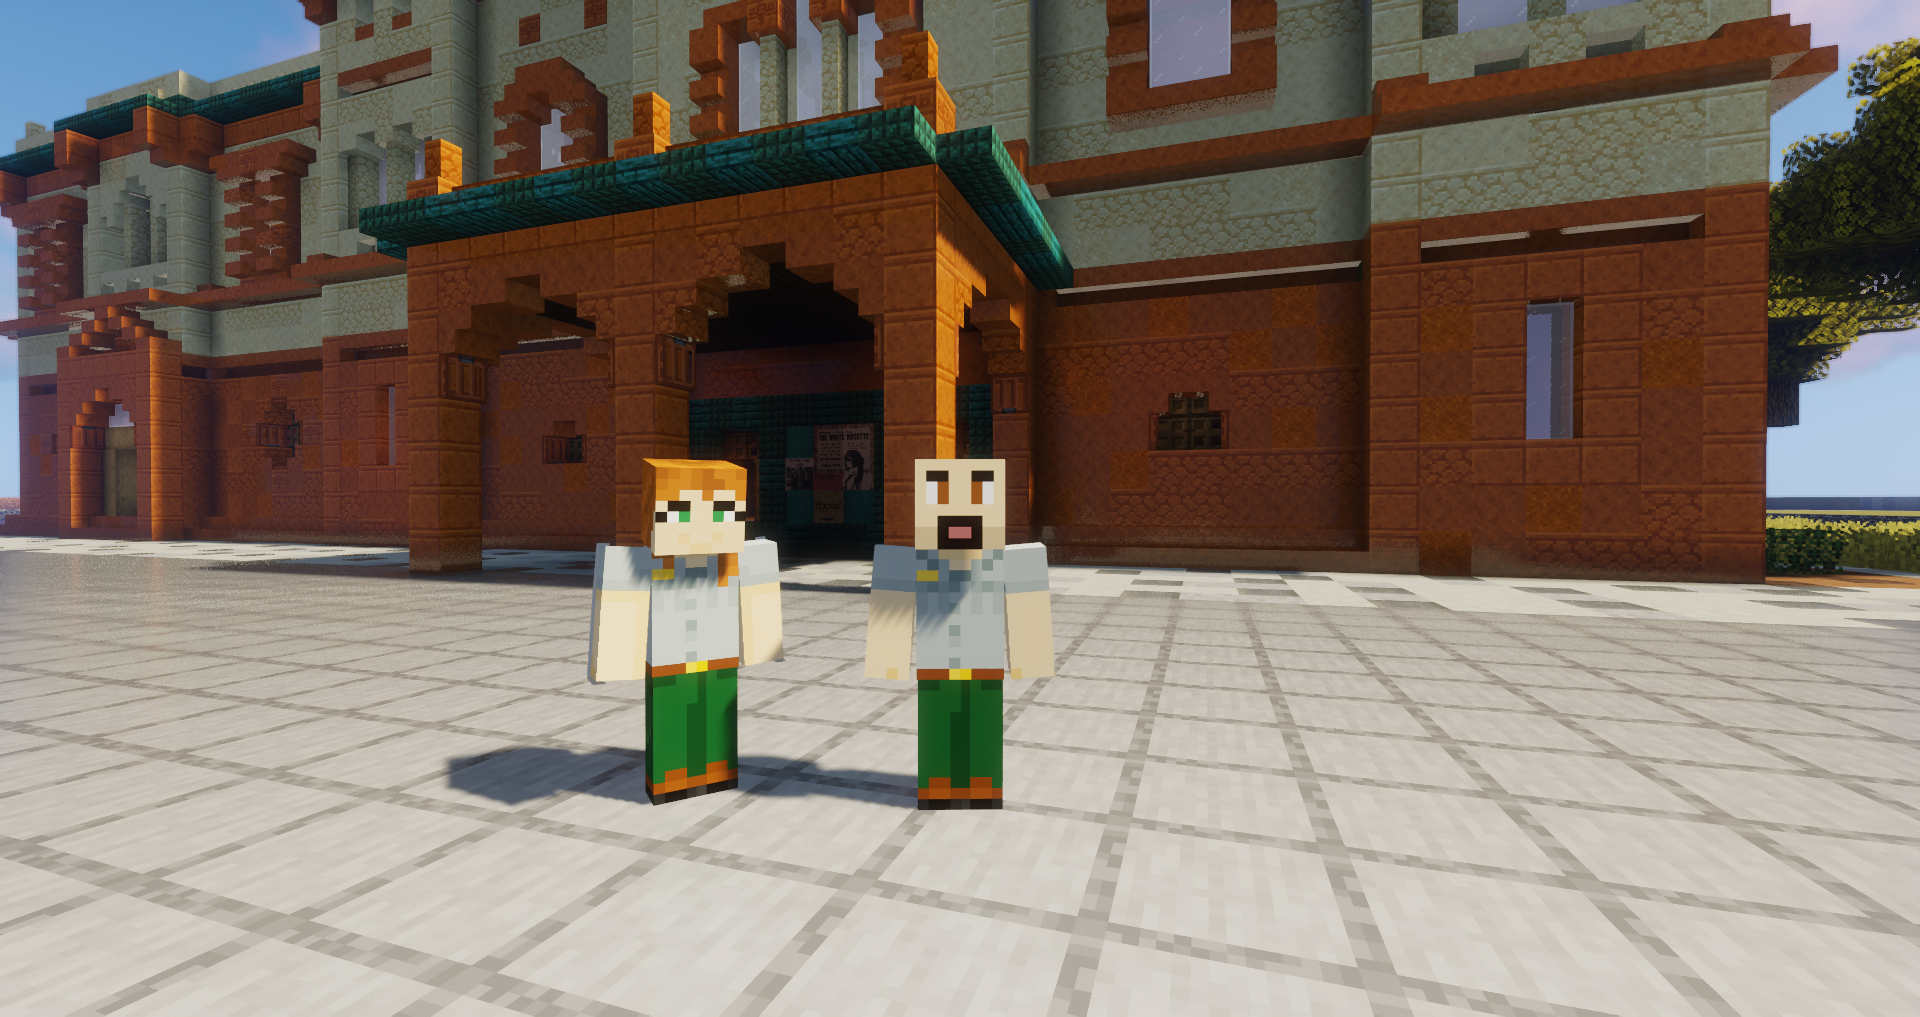 Two Minecraft players with park ranger skins in front of a building